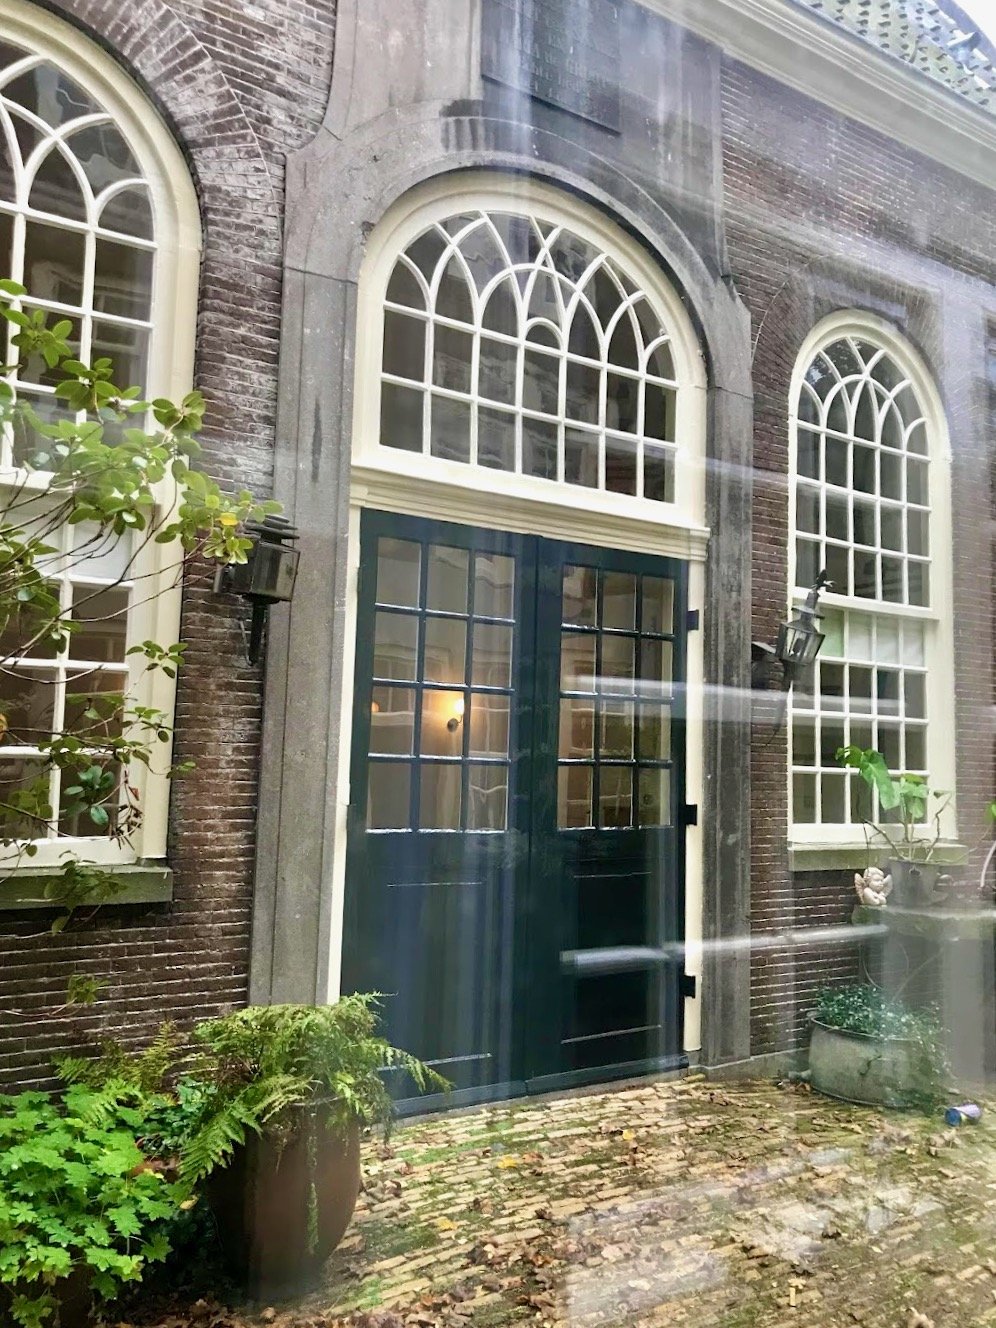  The clandestine chapel, from the old bleaching field, gives the feeling of a regal garden house. The stone over the window is inscribed: New Suykerhofje founded by ~ Gerrit ten Sande and Maria de Groot ~ Maried Couple ~ In the year 1755 